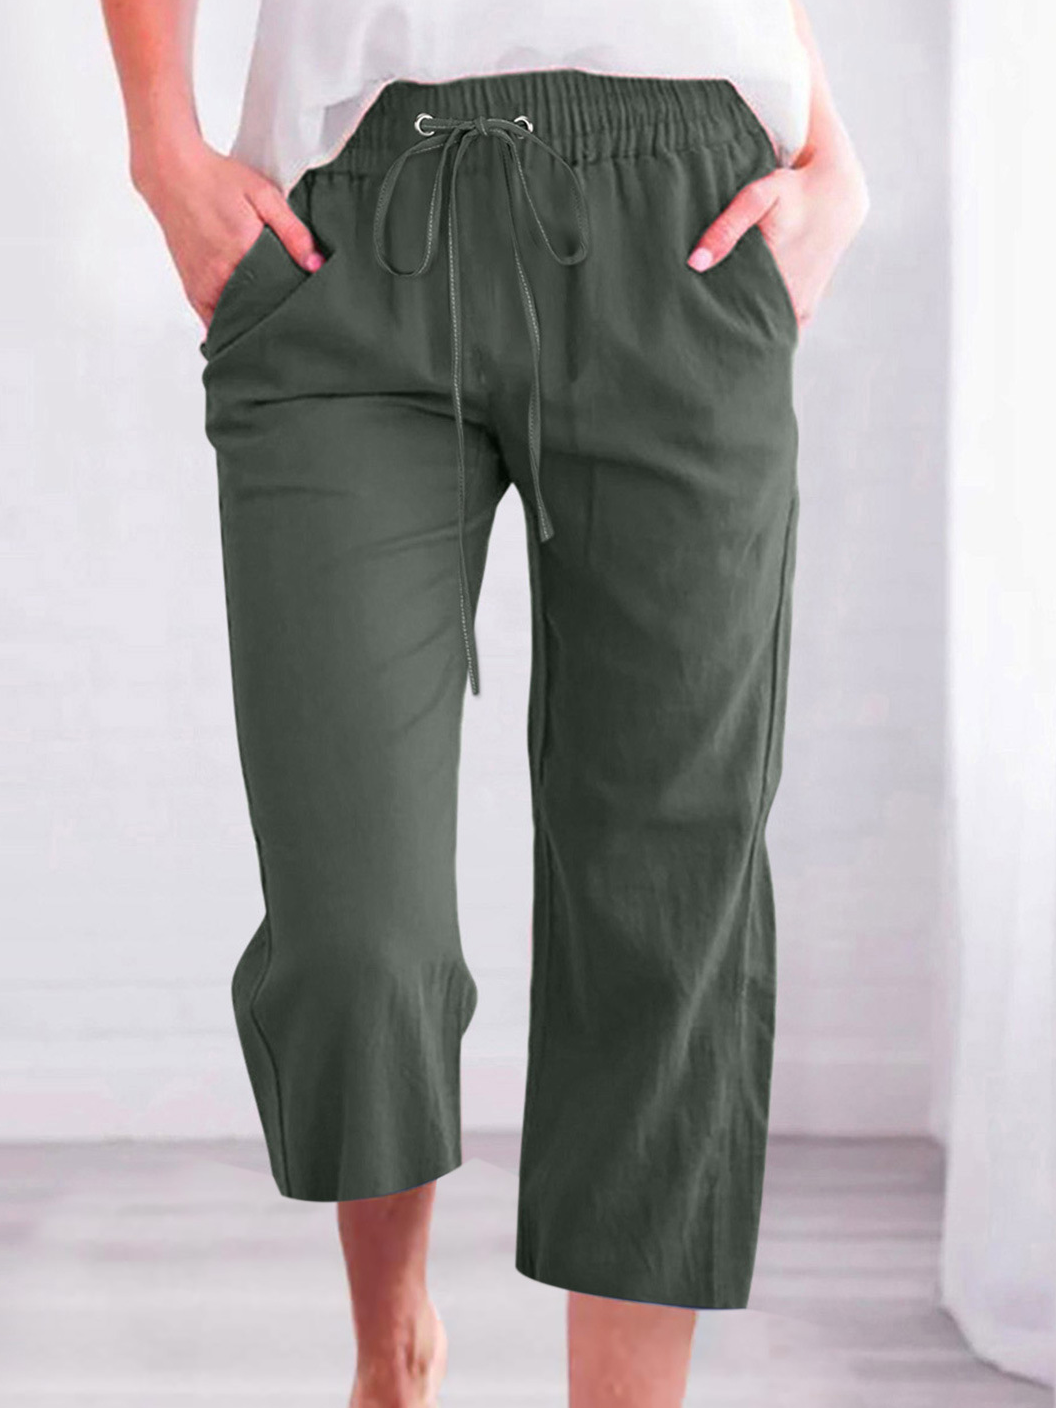 Women's Casual Summer Linen Pants High Waisted Loose Yoga Sweatpants Crop Pants with Pockets